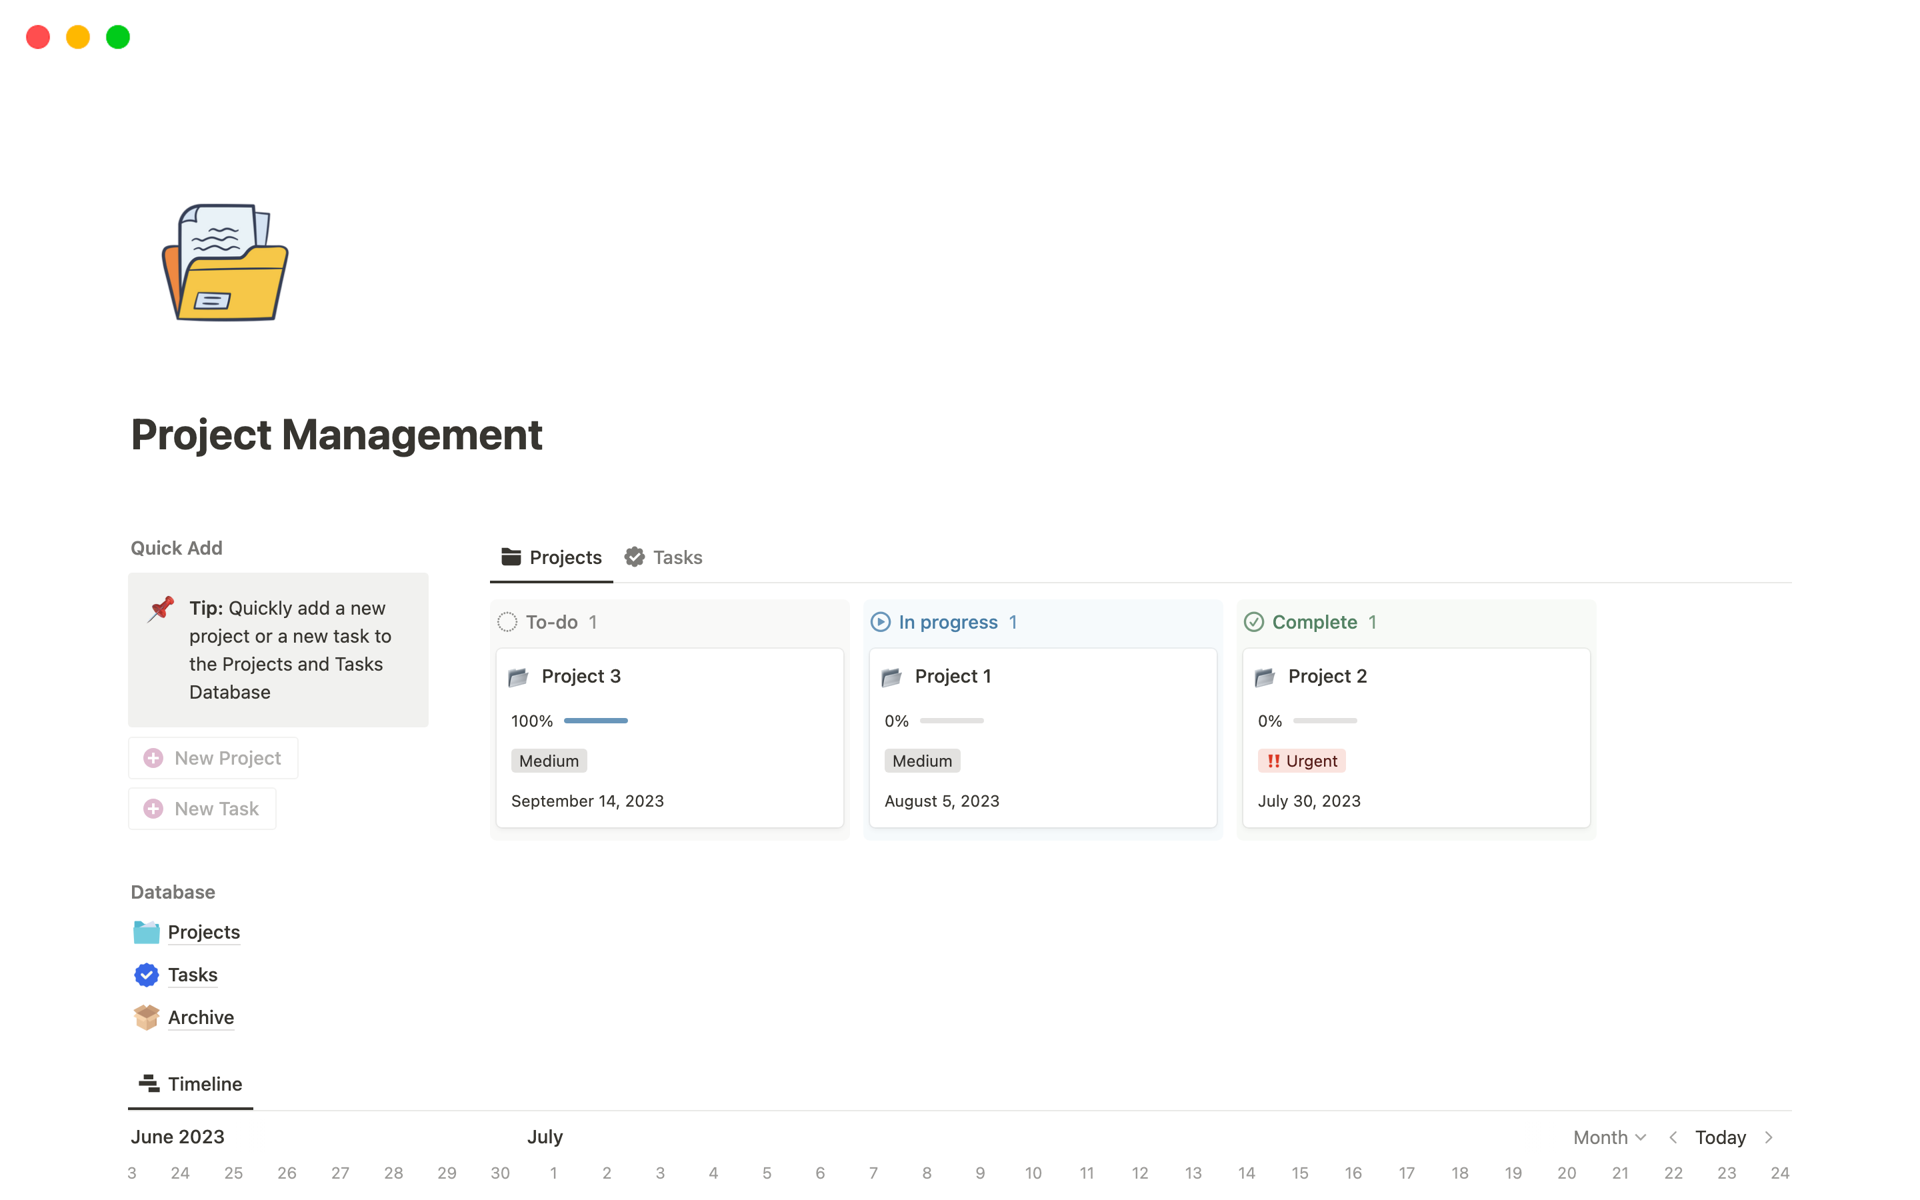 A comprehensive and flexible tool that helps plan, execute, and monitor projects efficiently.